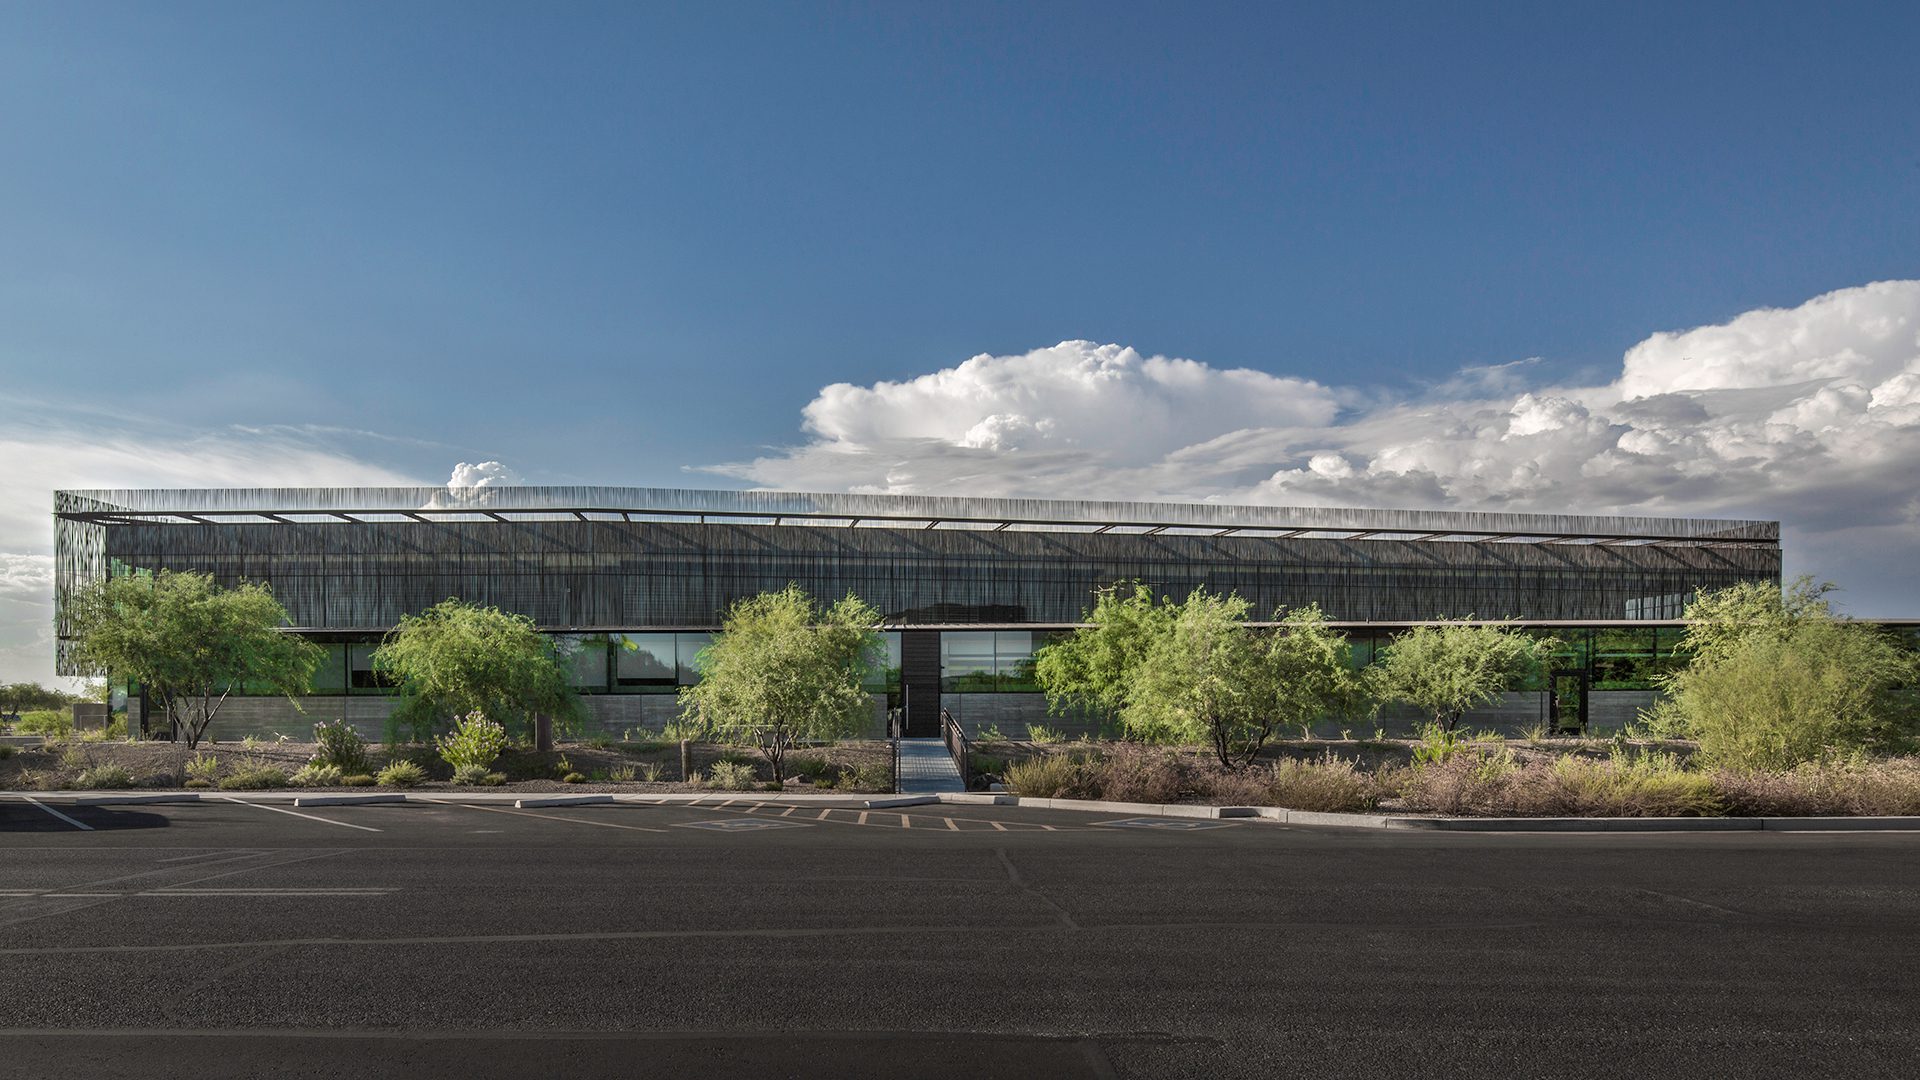 Image of Salt River Pima-Maricopa Indian Community exterior integrated with the landscape